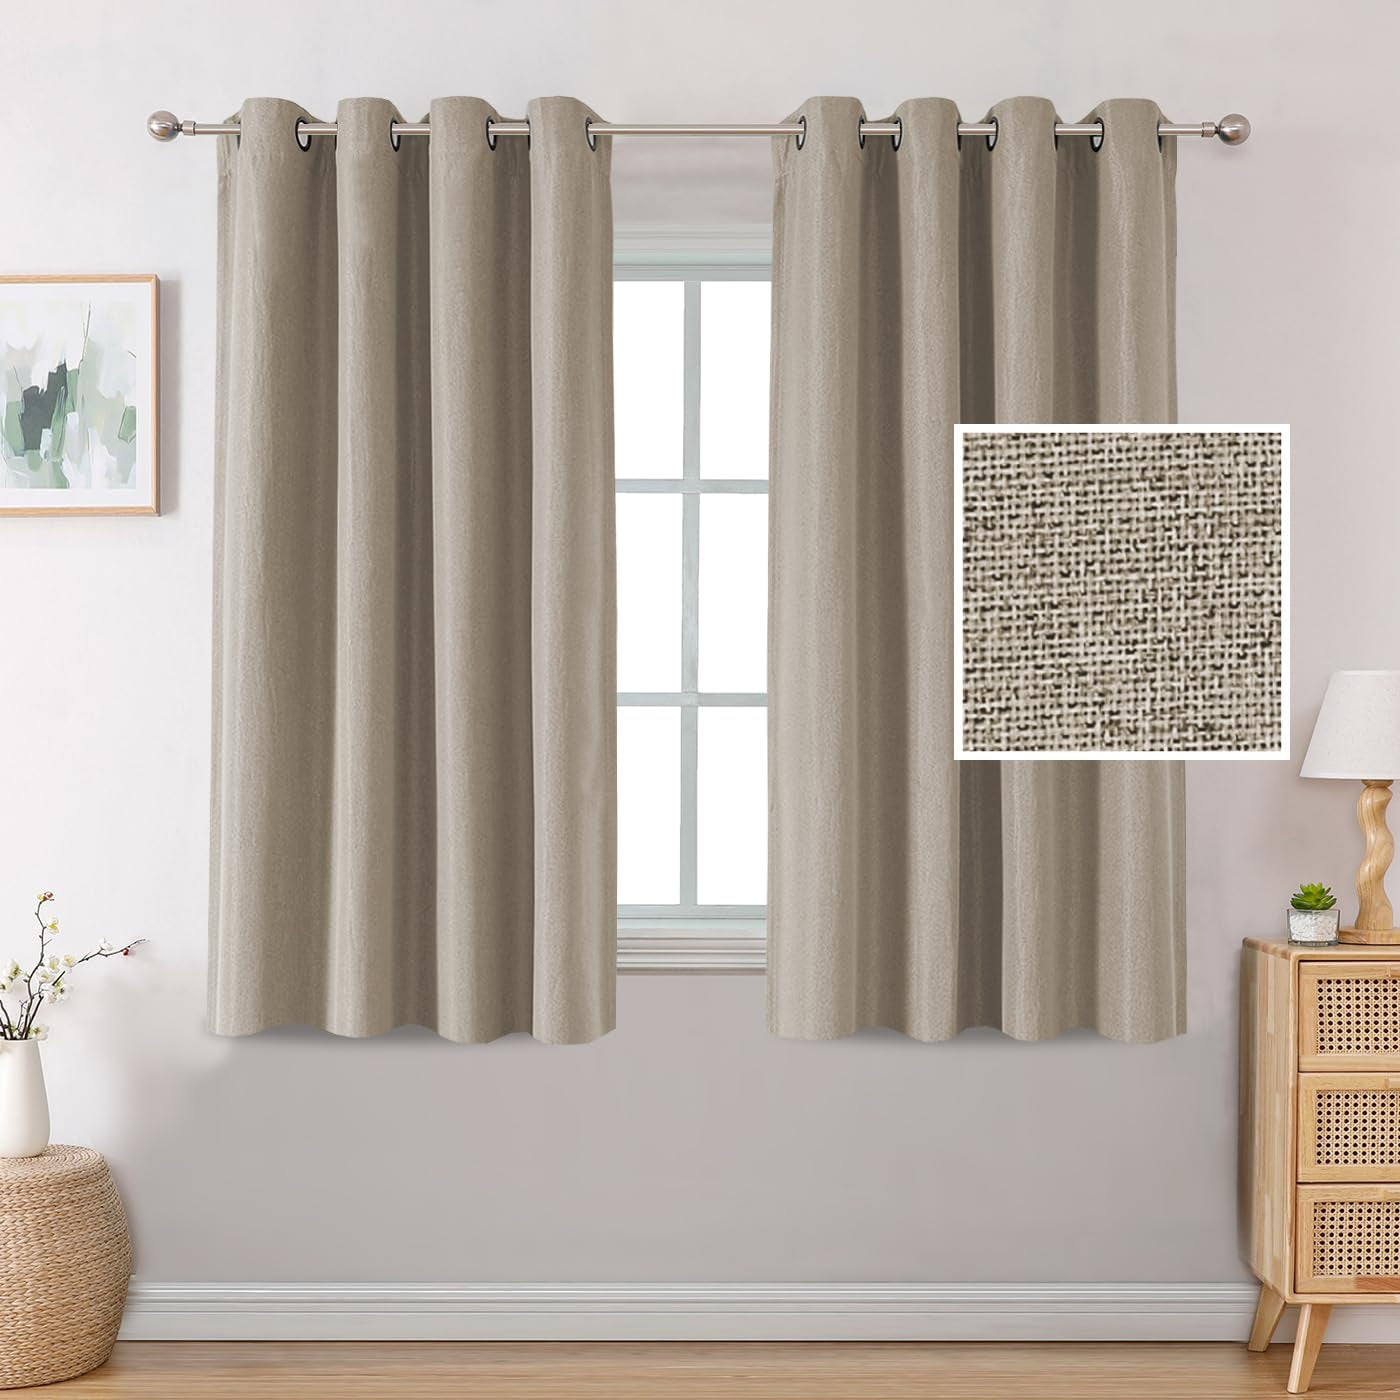 H.VERSAILTEX Linen Blackout Curtains 84 Inches Long Thermal Insulated Room Darkening Linen Curtains for Bedroom Textured Burlap Grommet Window Curtains for Living Room, Bluestone and Taupe, 2 Panels  H.VERSAILTEX Light Taupe 52"W X 45"L 